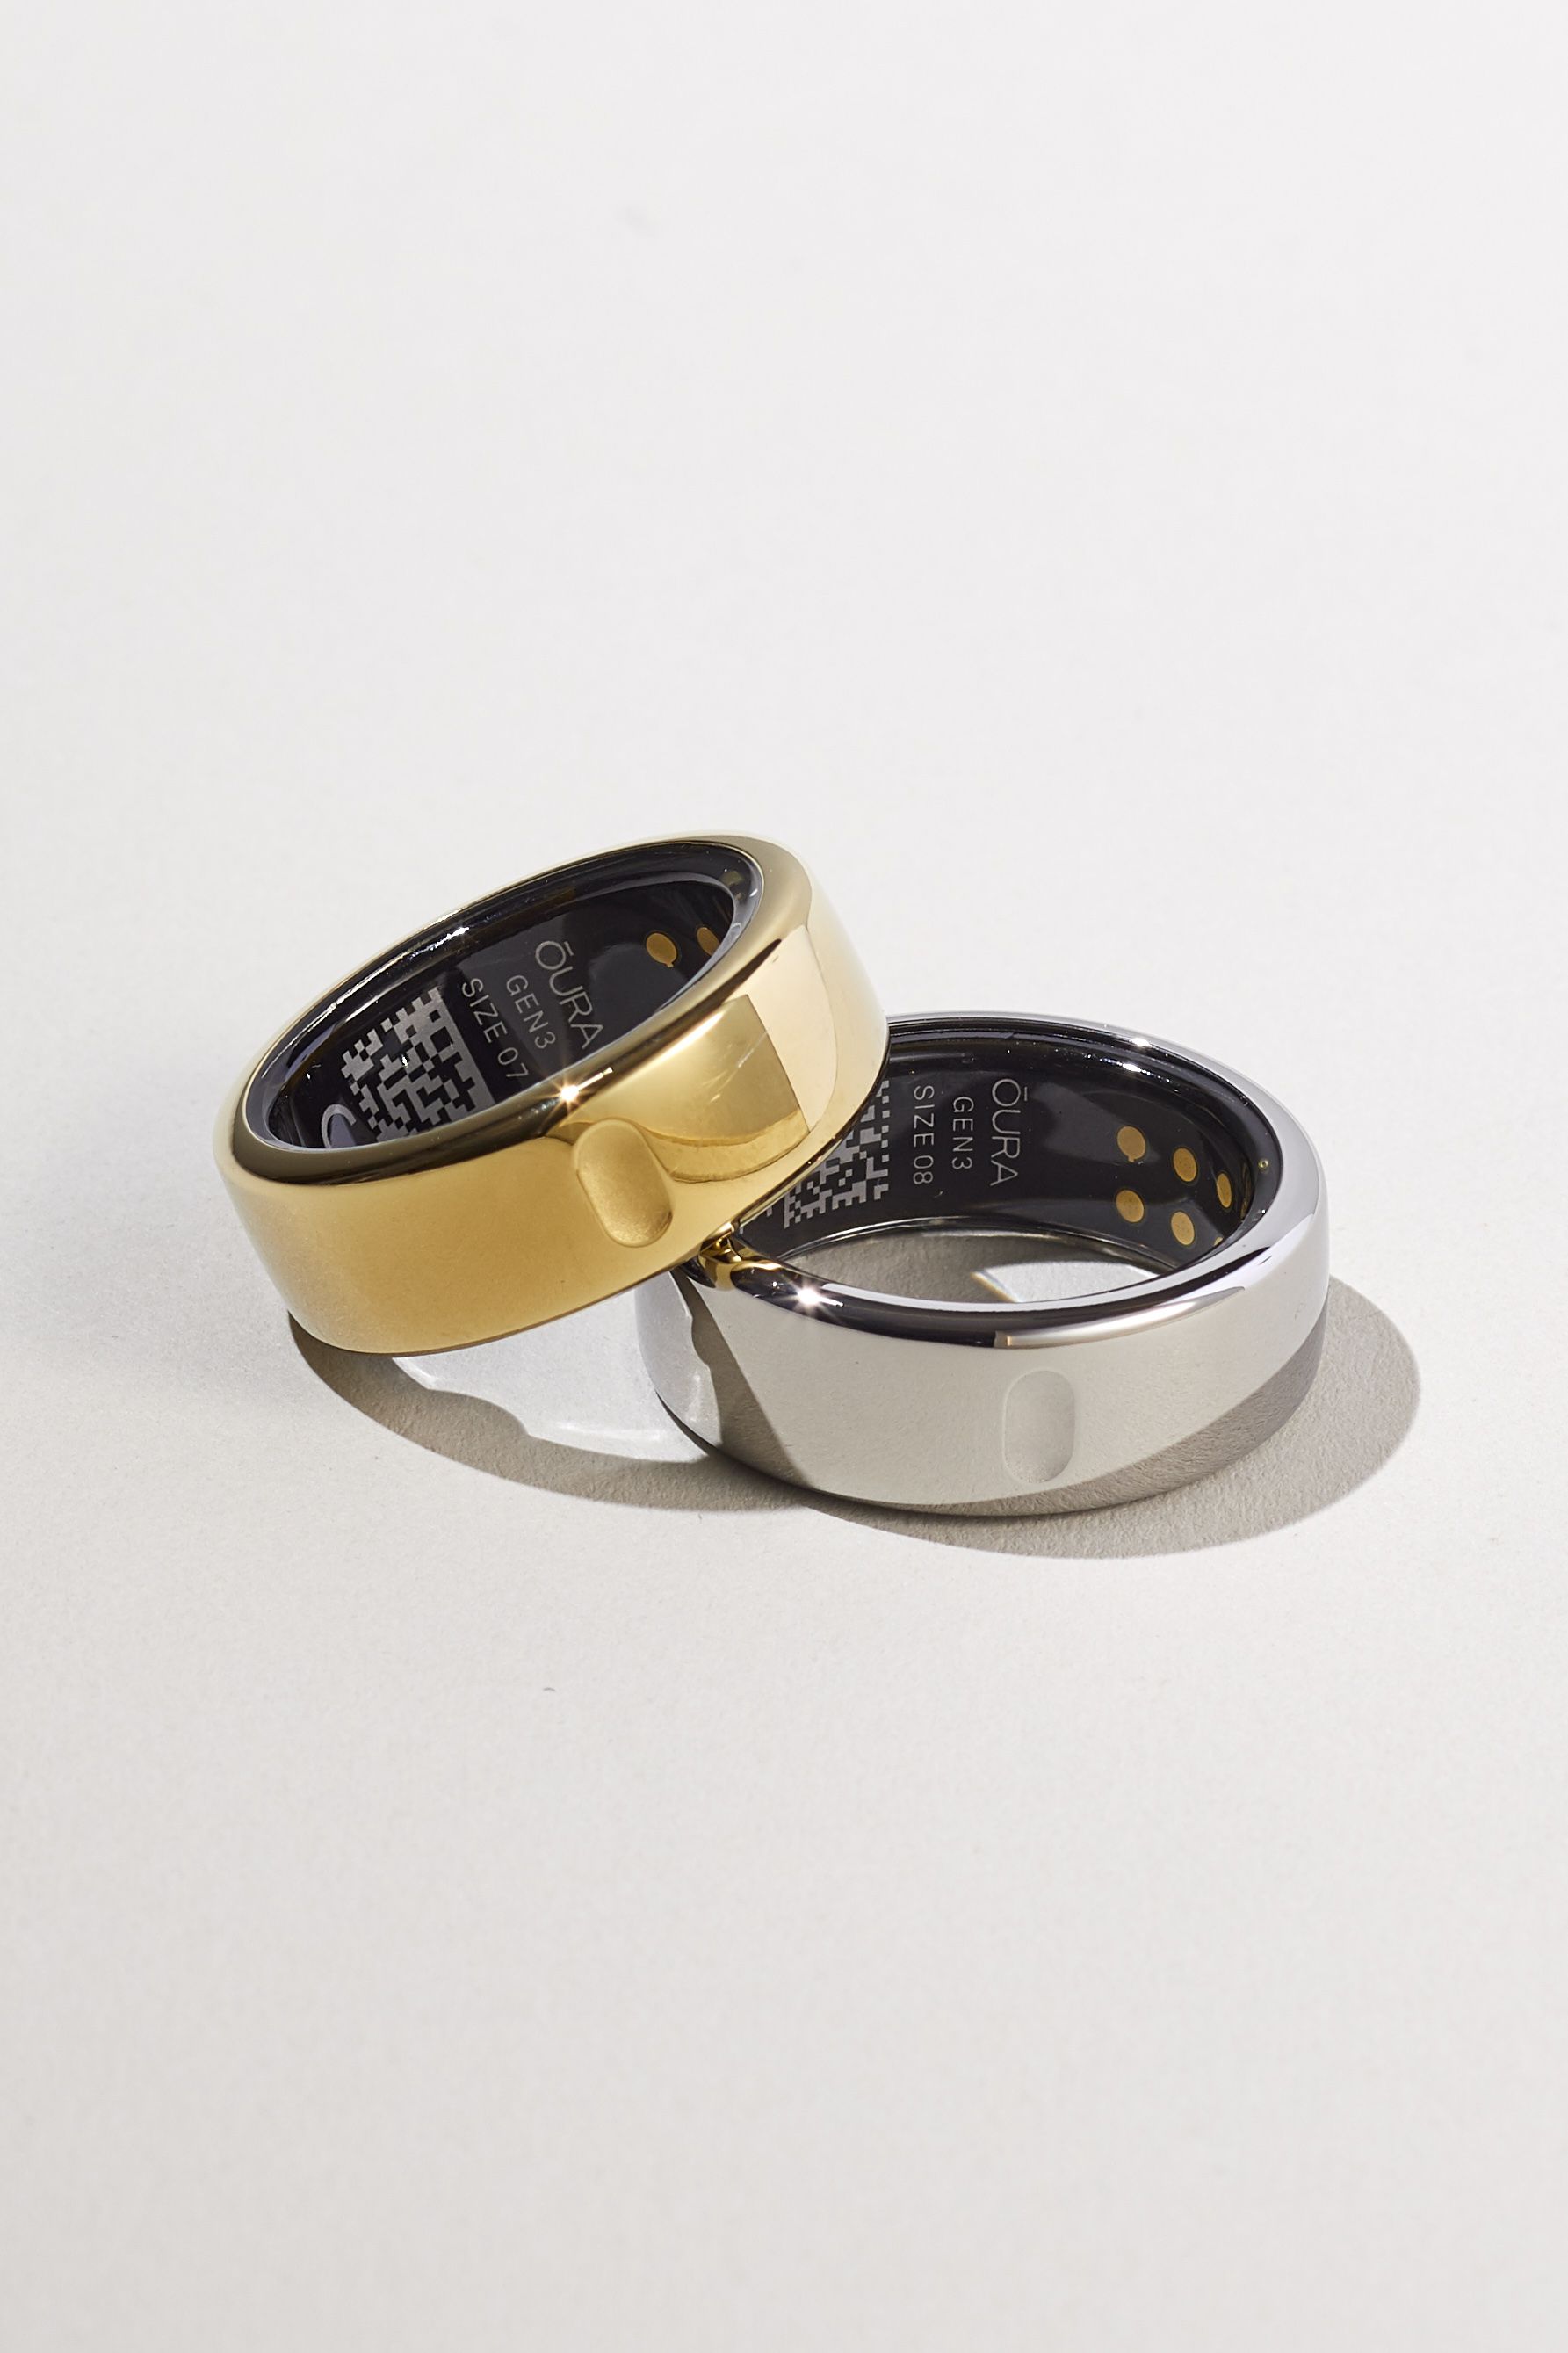 Oura Ring for the press and media